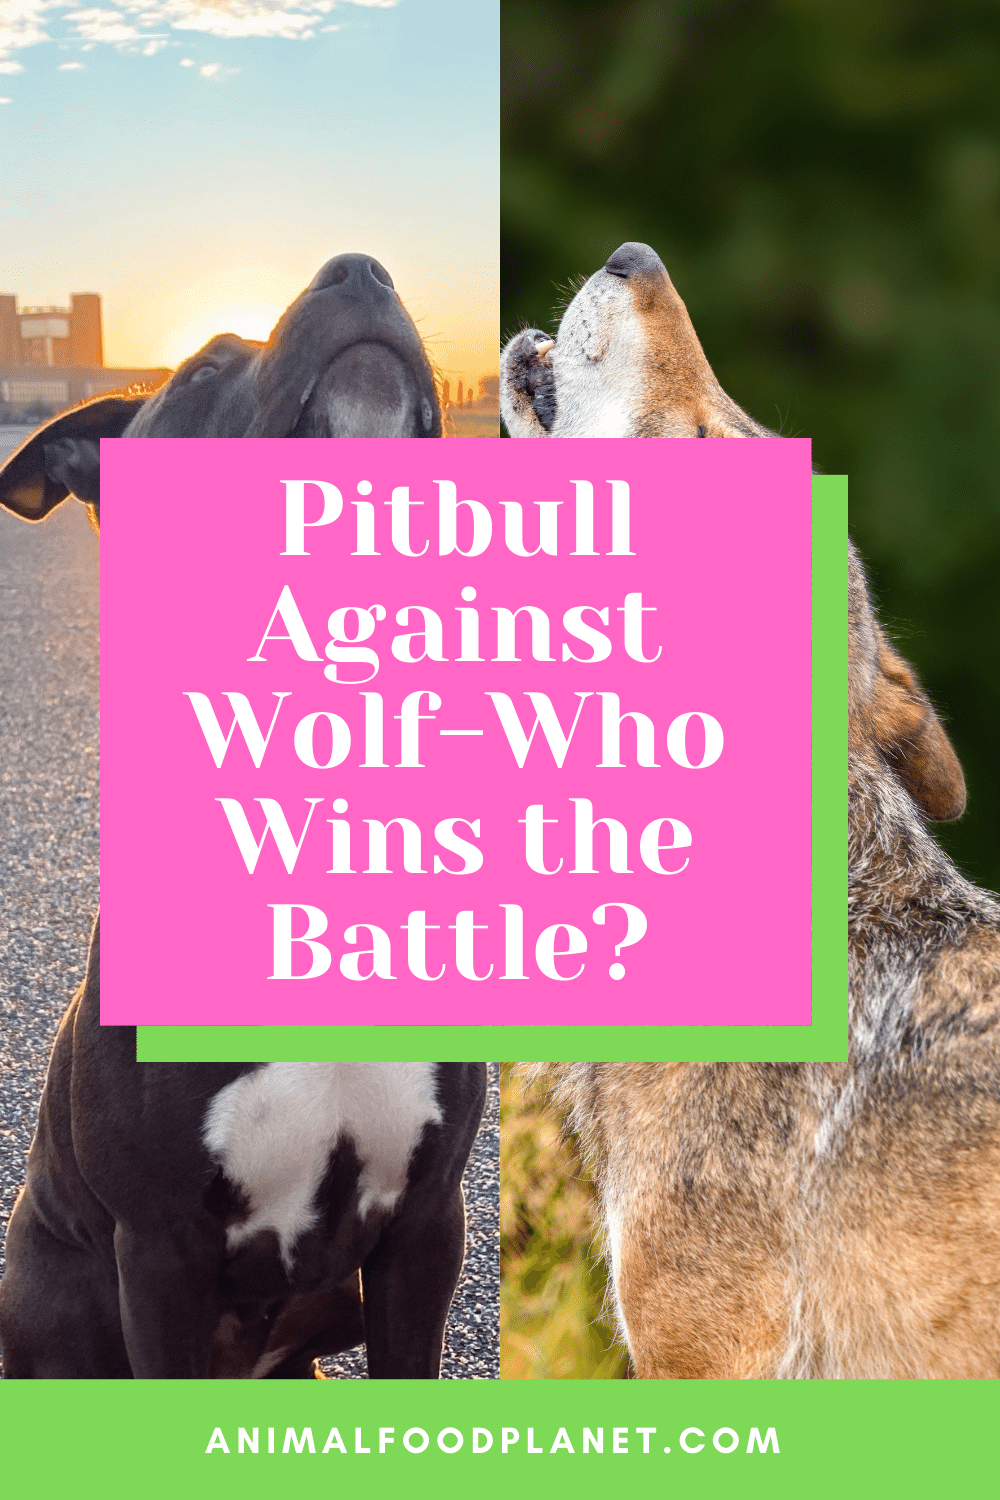 Pitbull Against Wolf-Who Wins The Battle